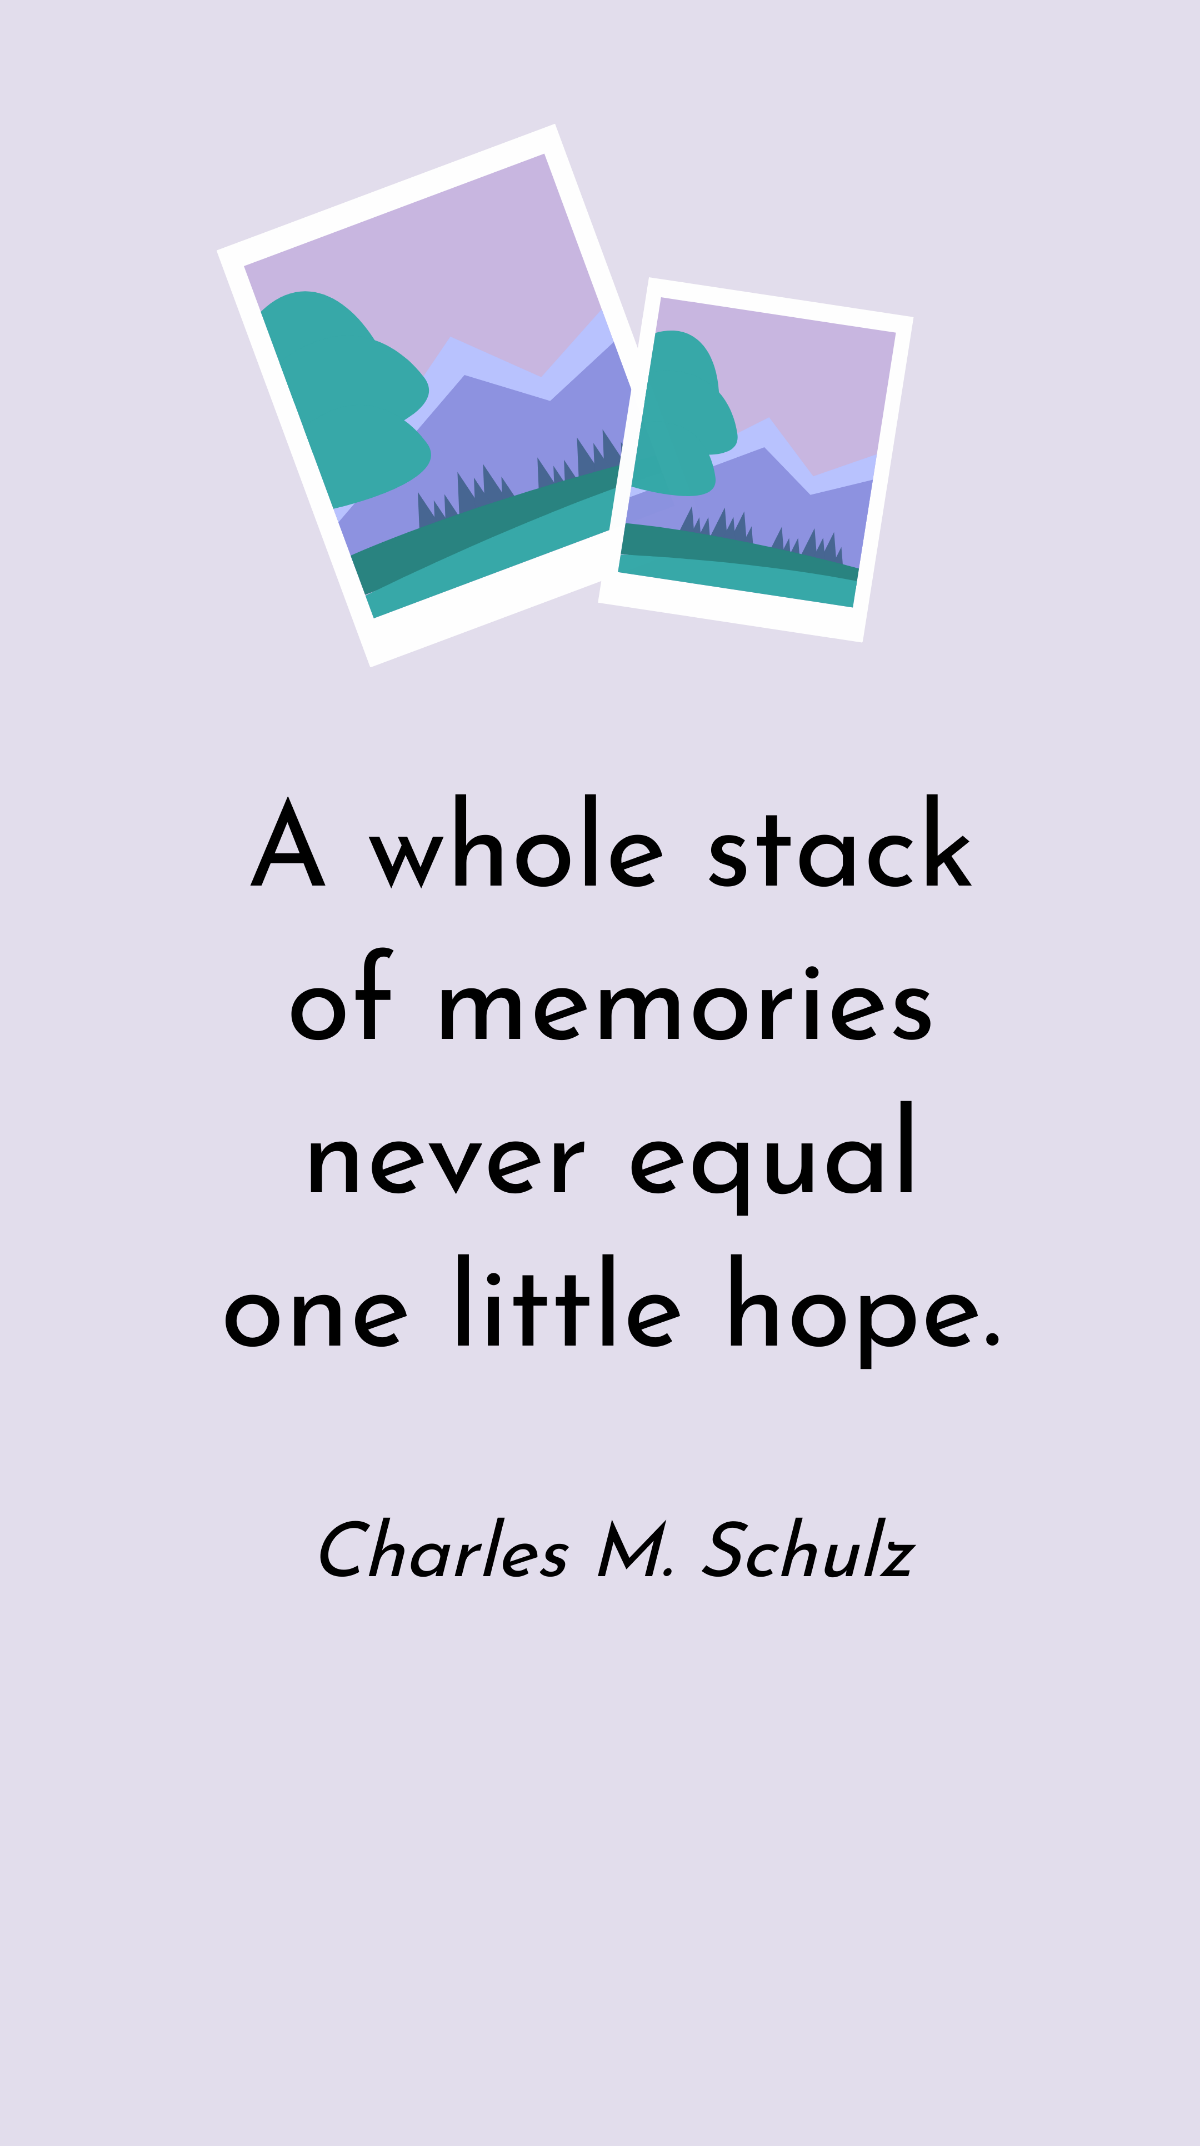 Charles M. Schulz - A whole stack of memories never equal one little hope. Template